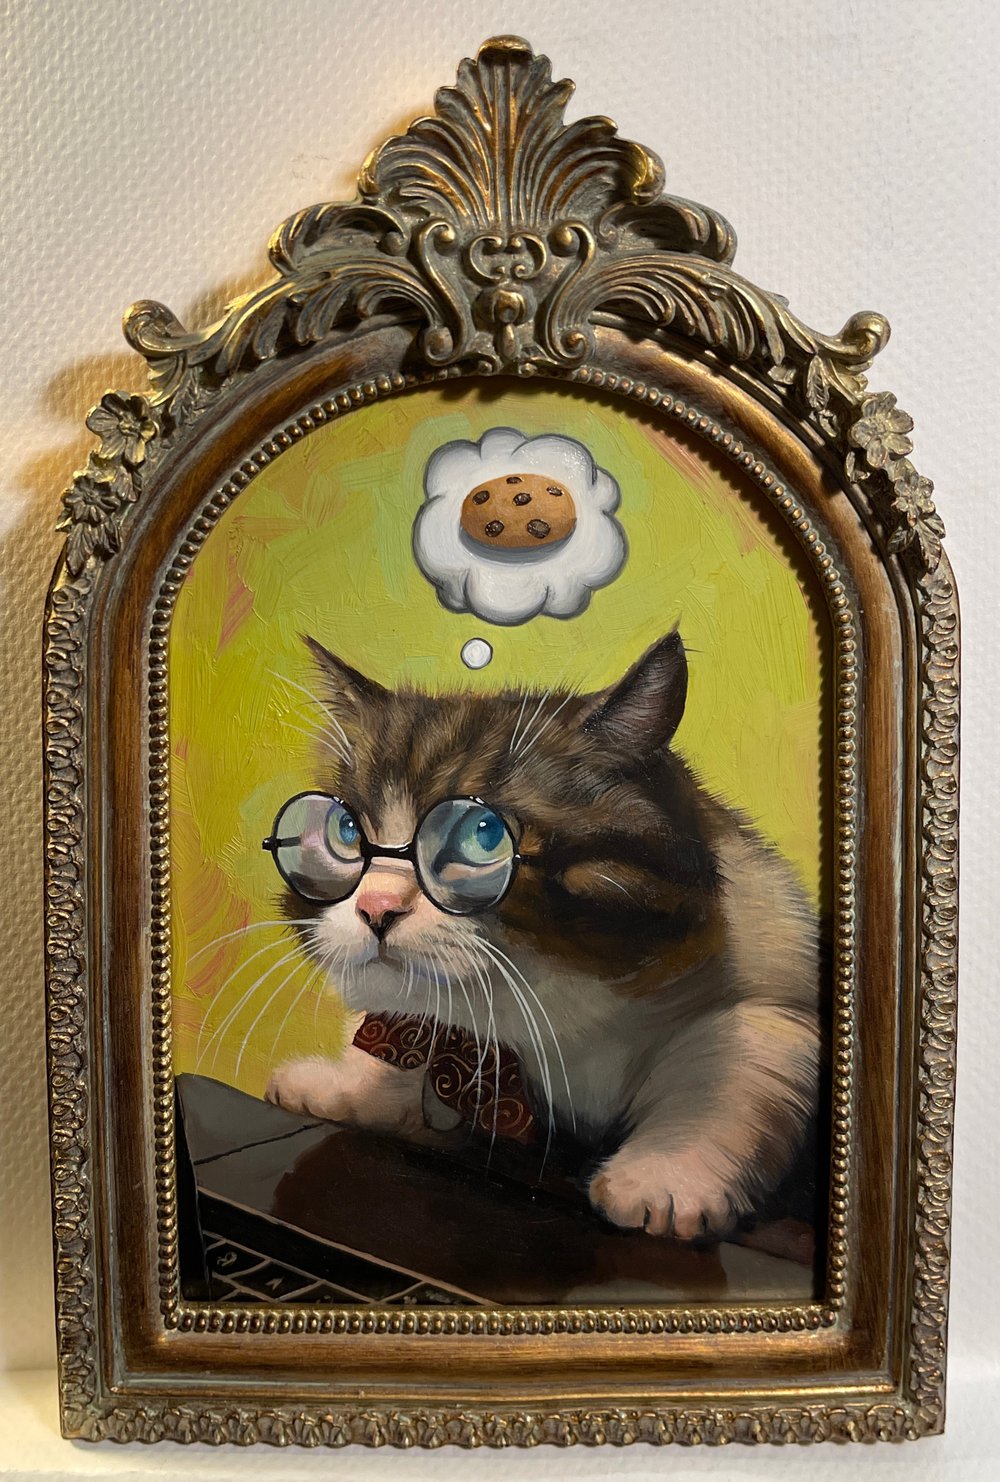 Image of "Do You Accept Cookies?" Original painting